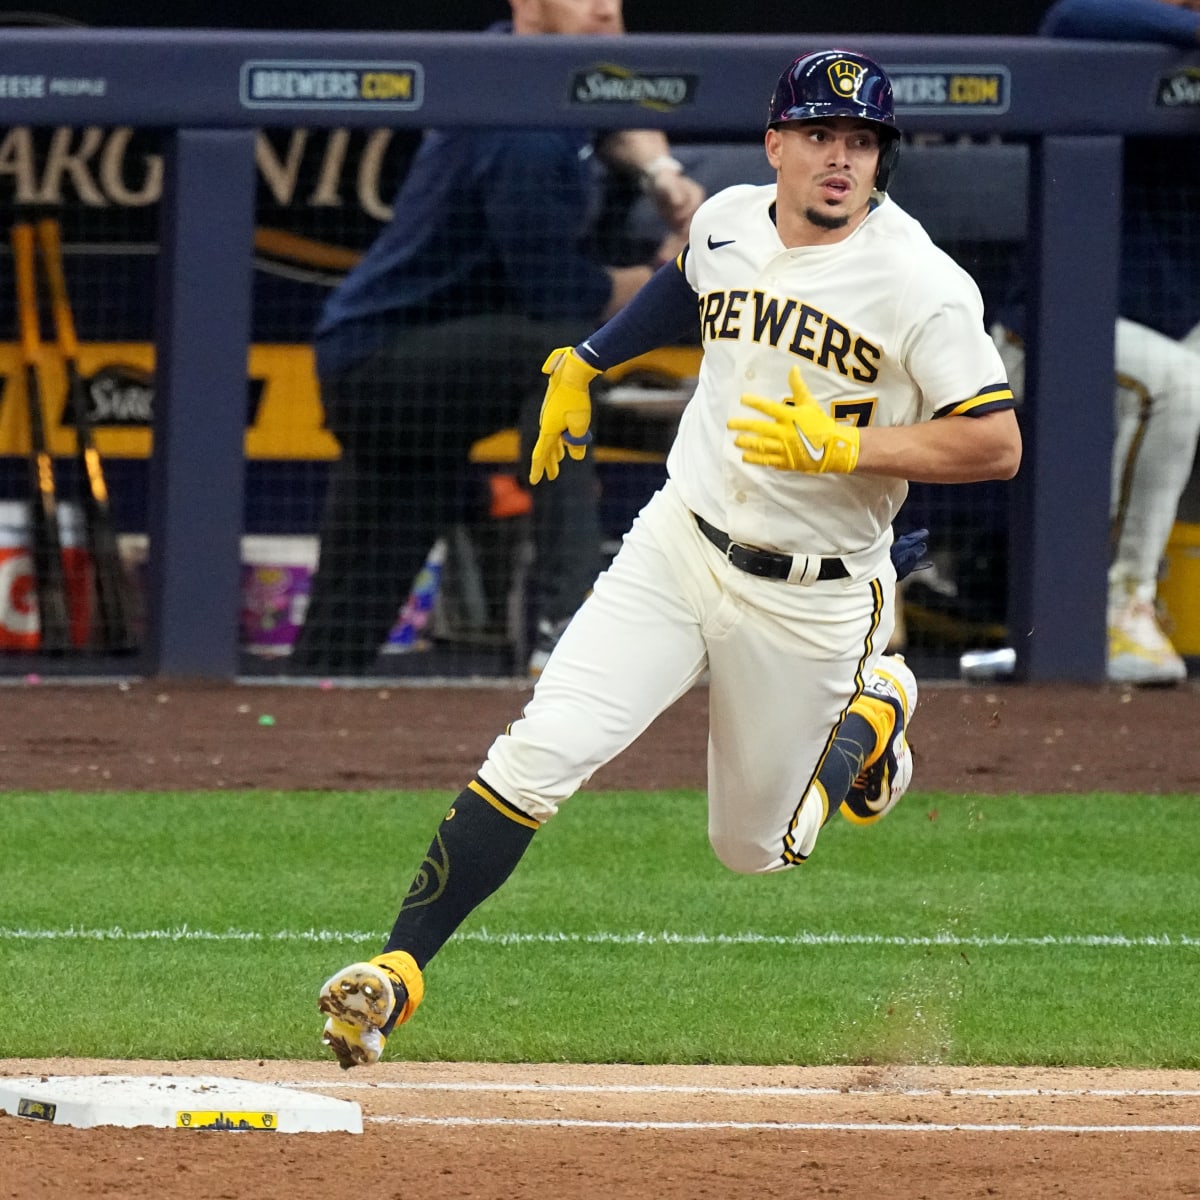 Milwaukee Brewers: Willy Adames Hits Home Run Against Tampa Bay